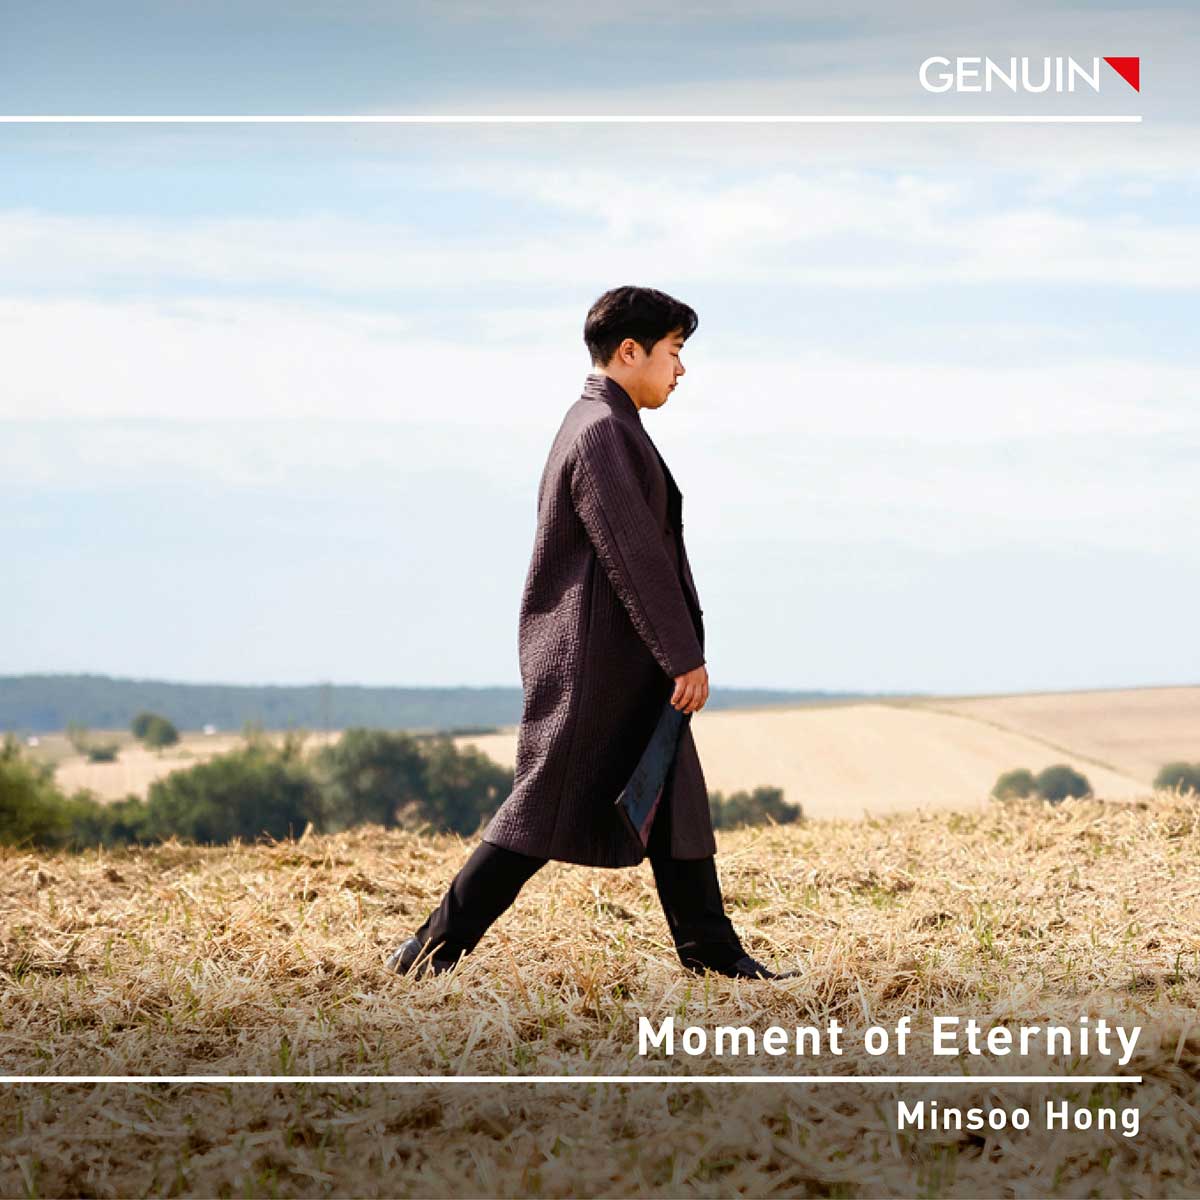 CD album cover 'Moment of Eternity' (GEN 23827) with Minsoo Hong